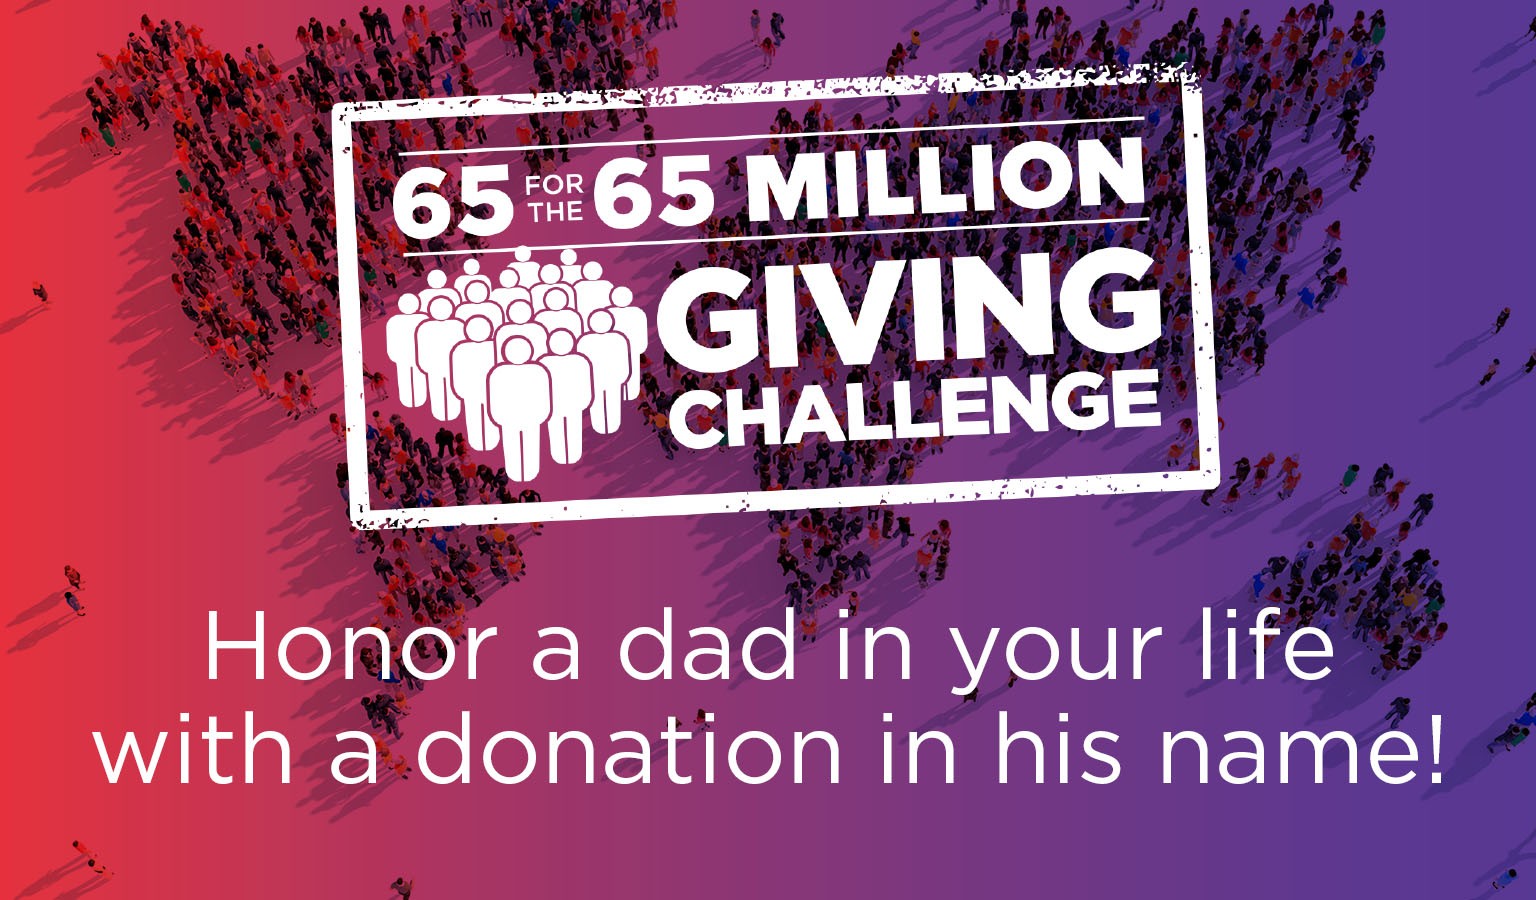 65 for the 65 Million Giving Challenge - Honor a dad in your life with a donation in his name!